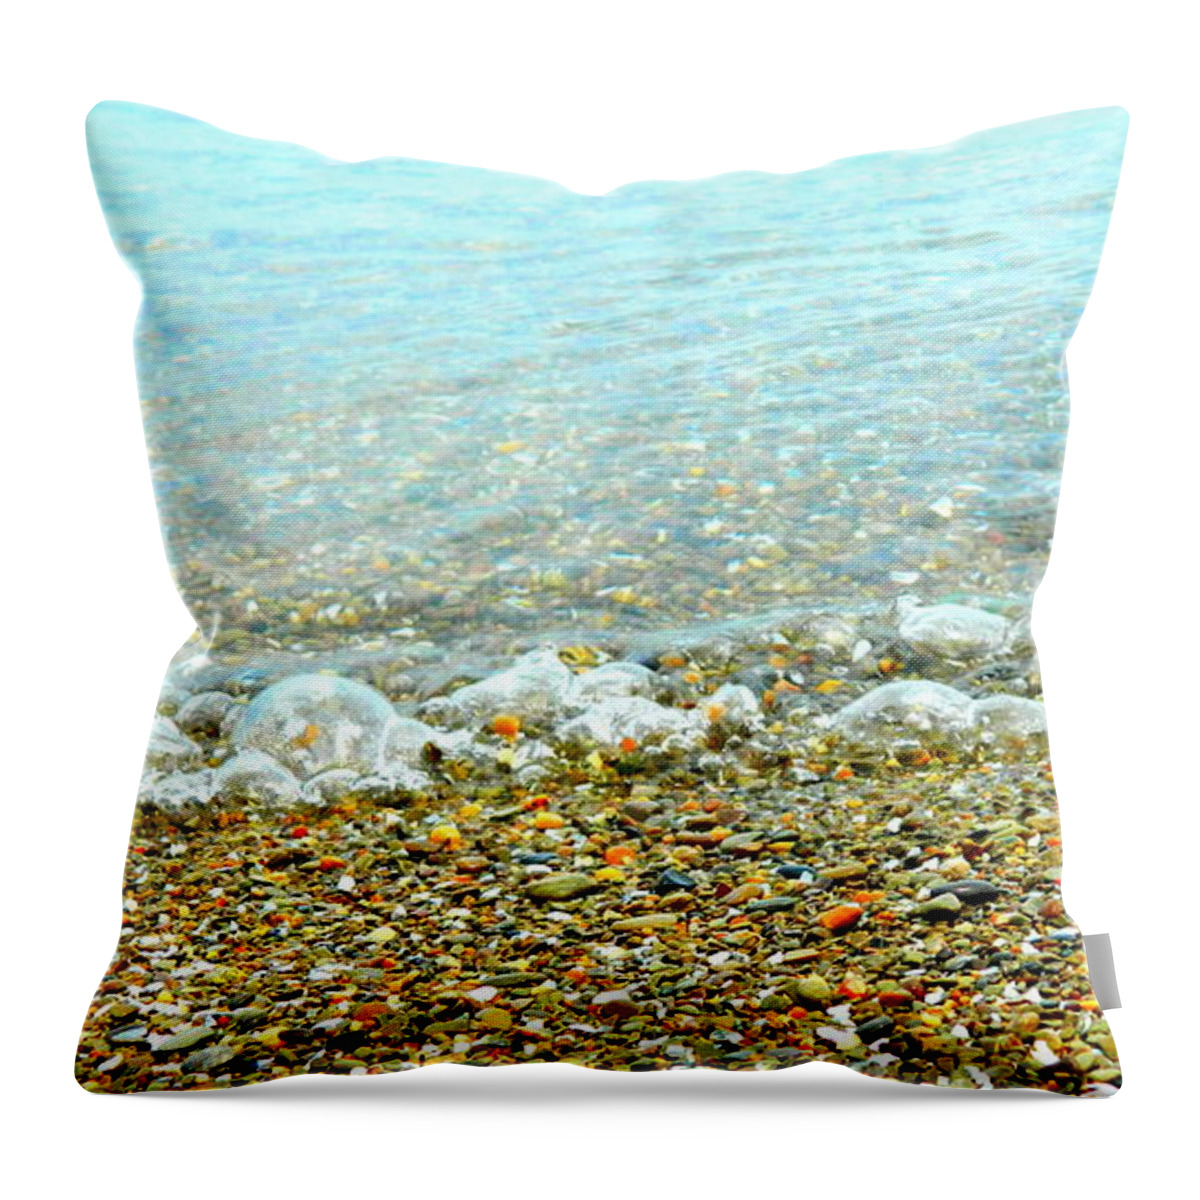 Water Throw Pillow featuring the photograph Lake Erie Bubble Waves by Kathy Barney